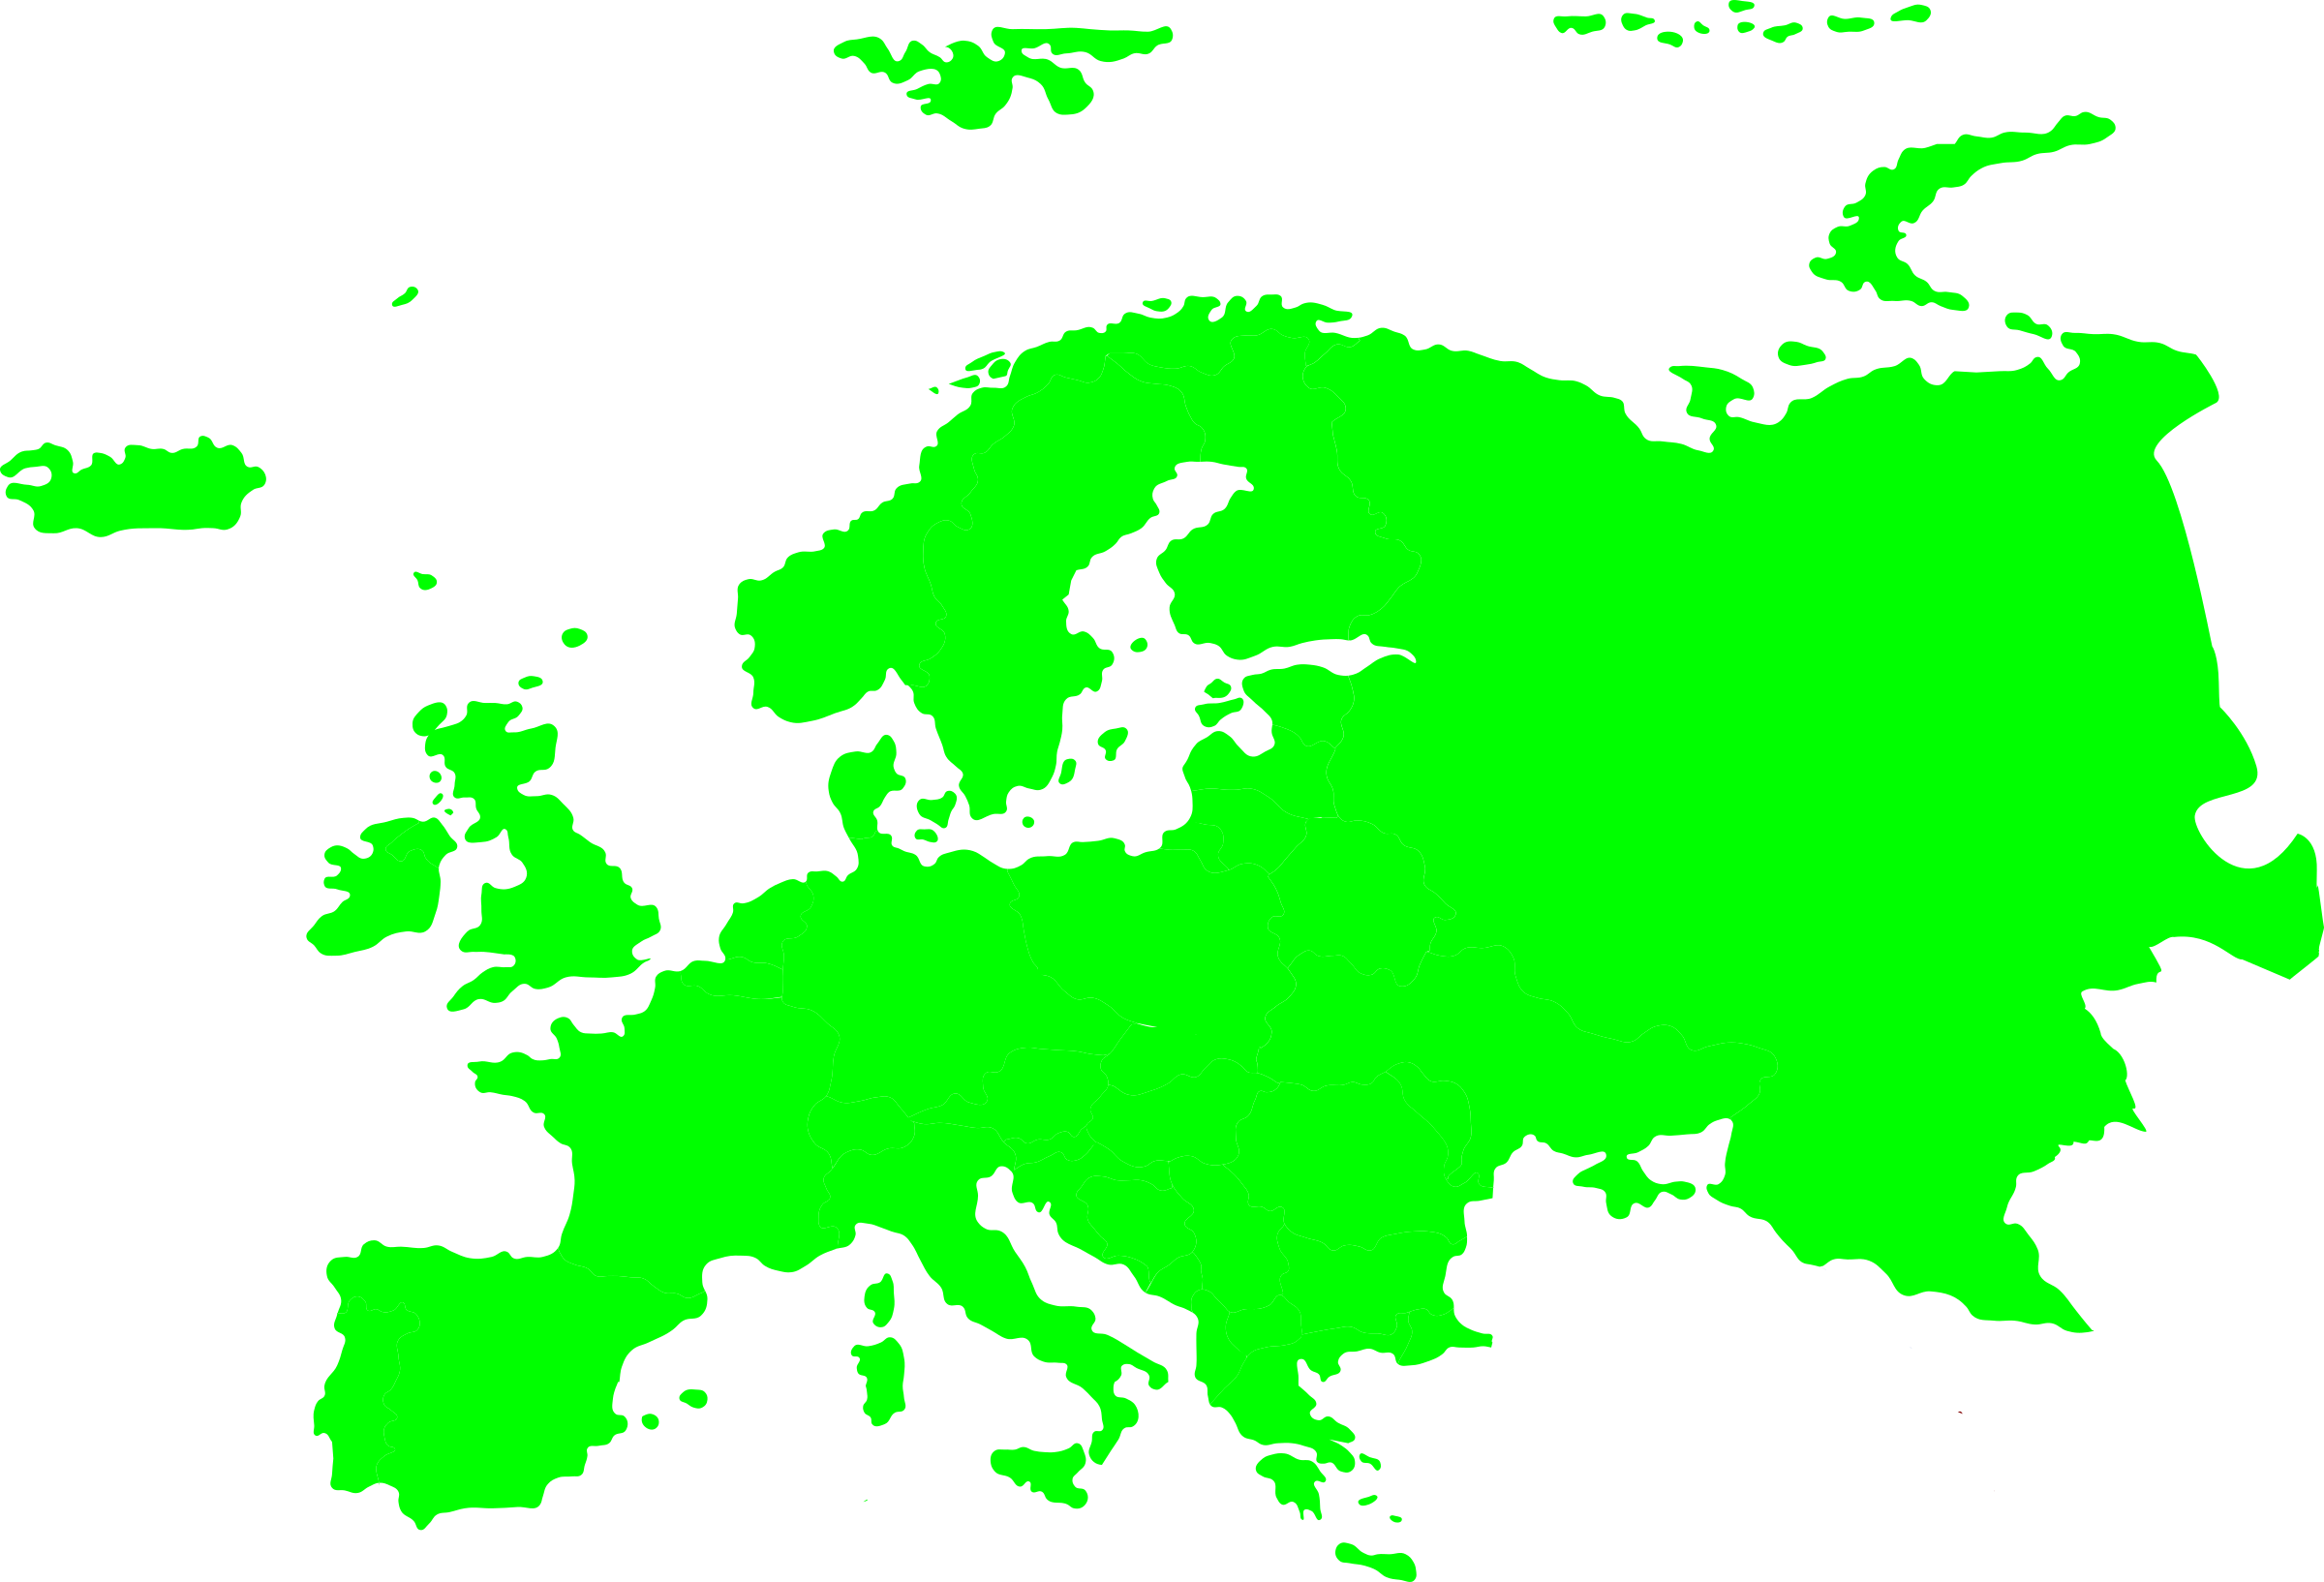 europe continent - Image